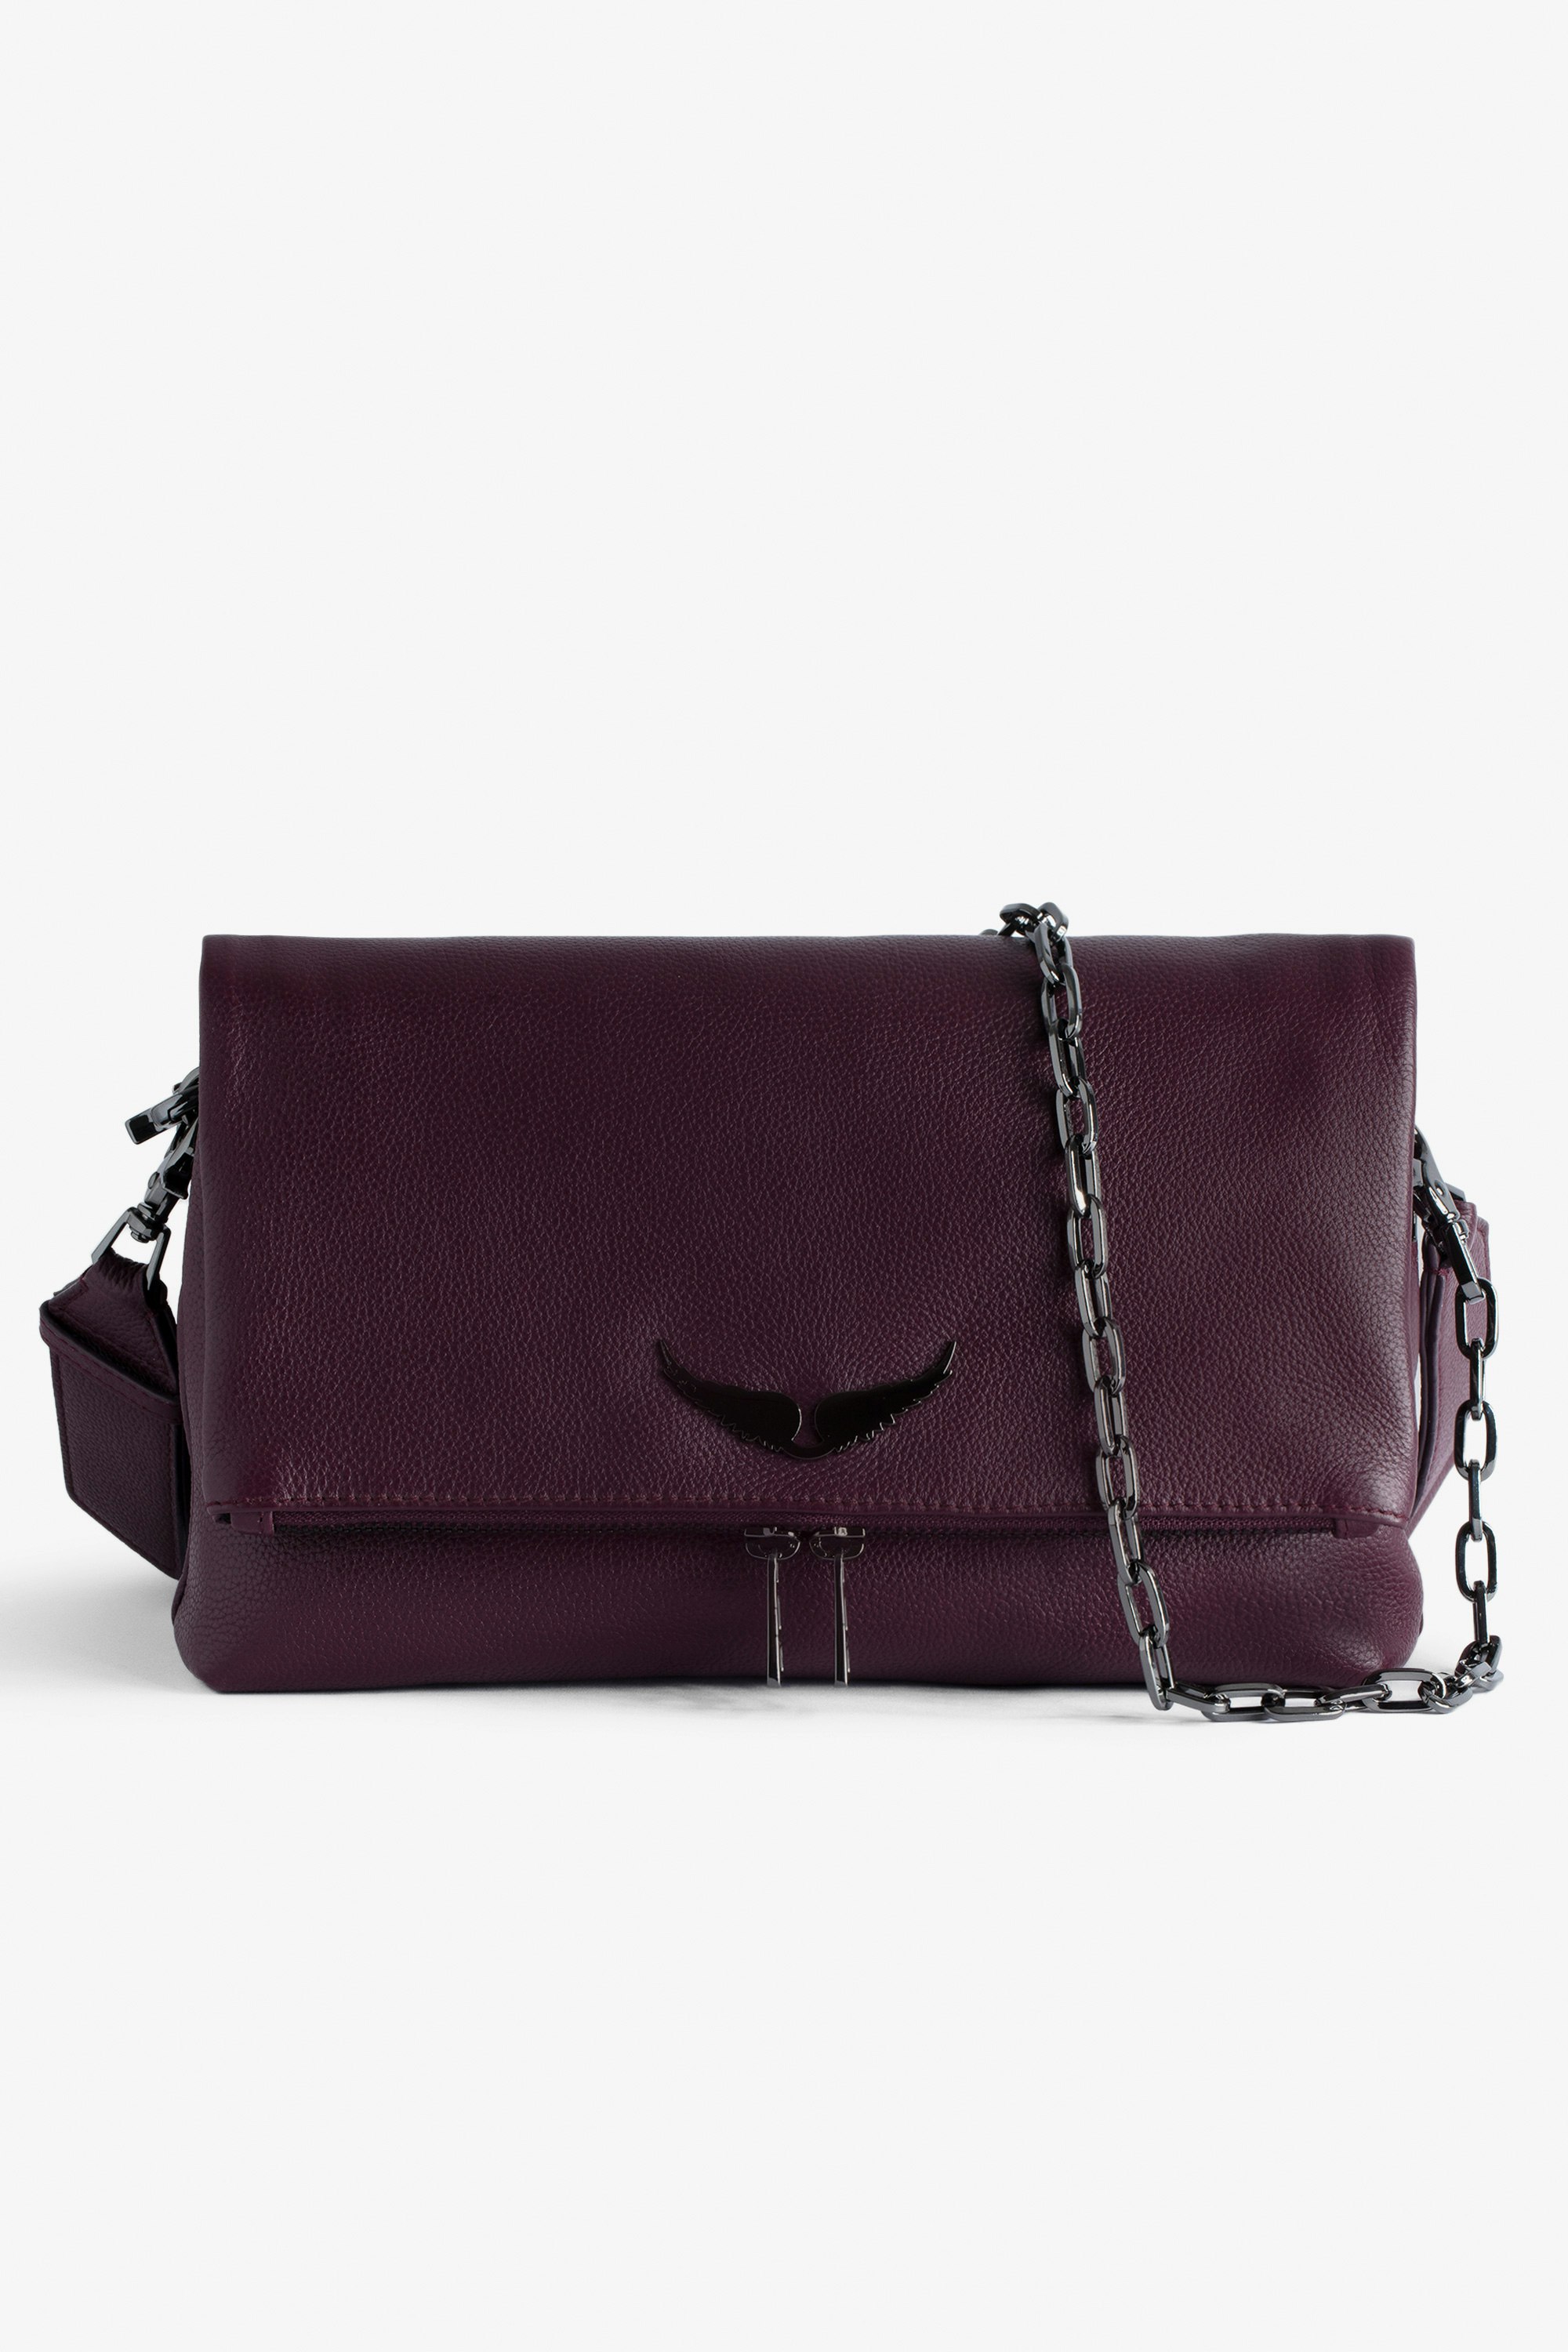 Rocky Bag Women’s burgundy grained leather bag with shoulder strap and wings charm